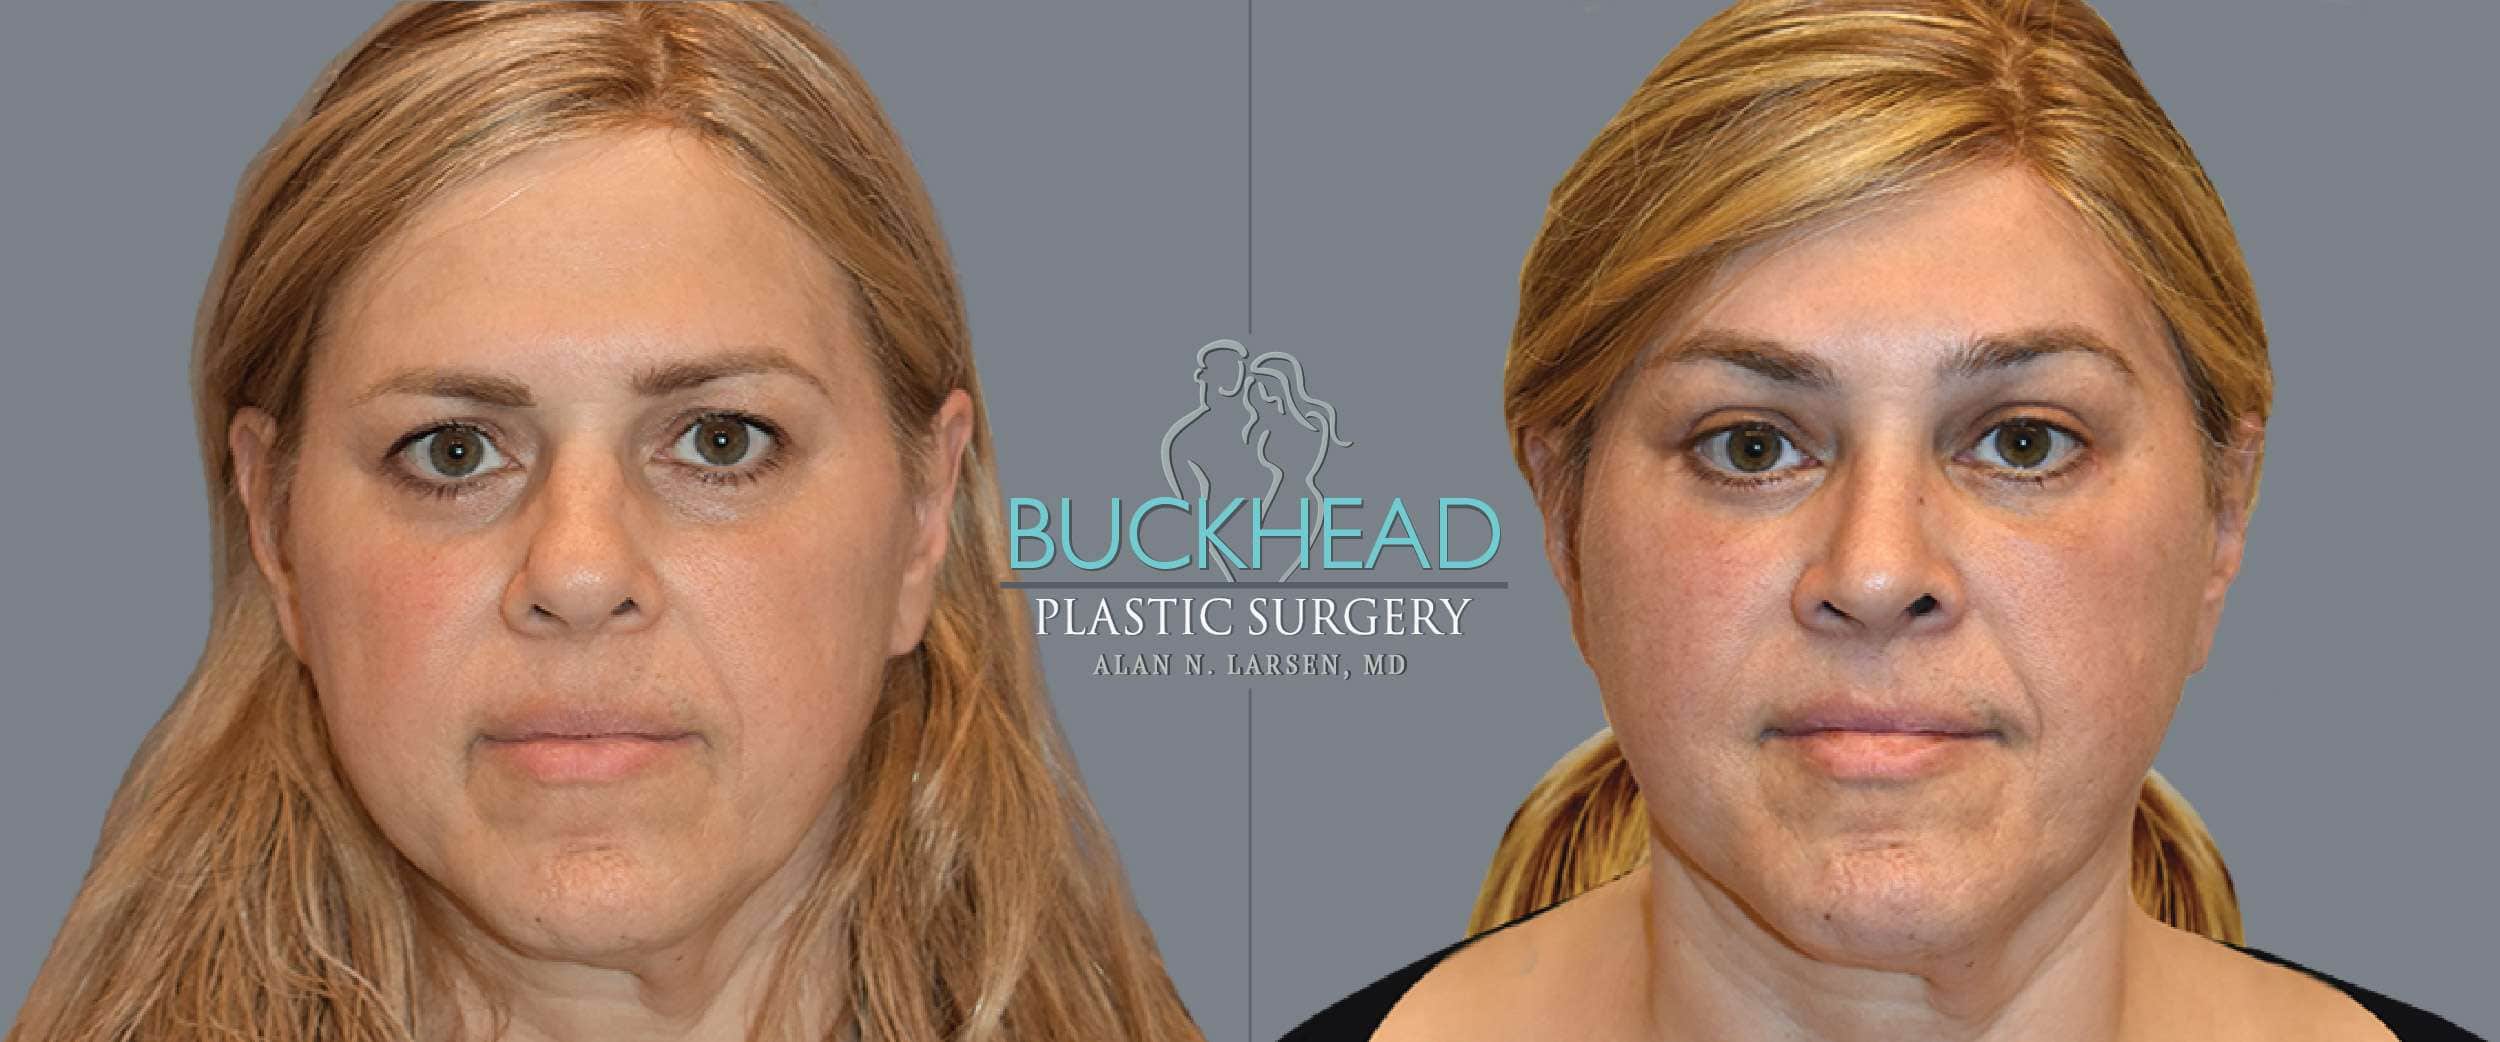 Before and After Photo Gallery | Blepharosty | Buckhead Plastic Surgery | Alan N. Larsen, MD | Double Board-Certified Plastic Surgeon | Atlanta GA